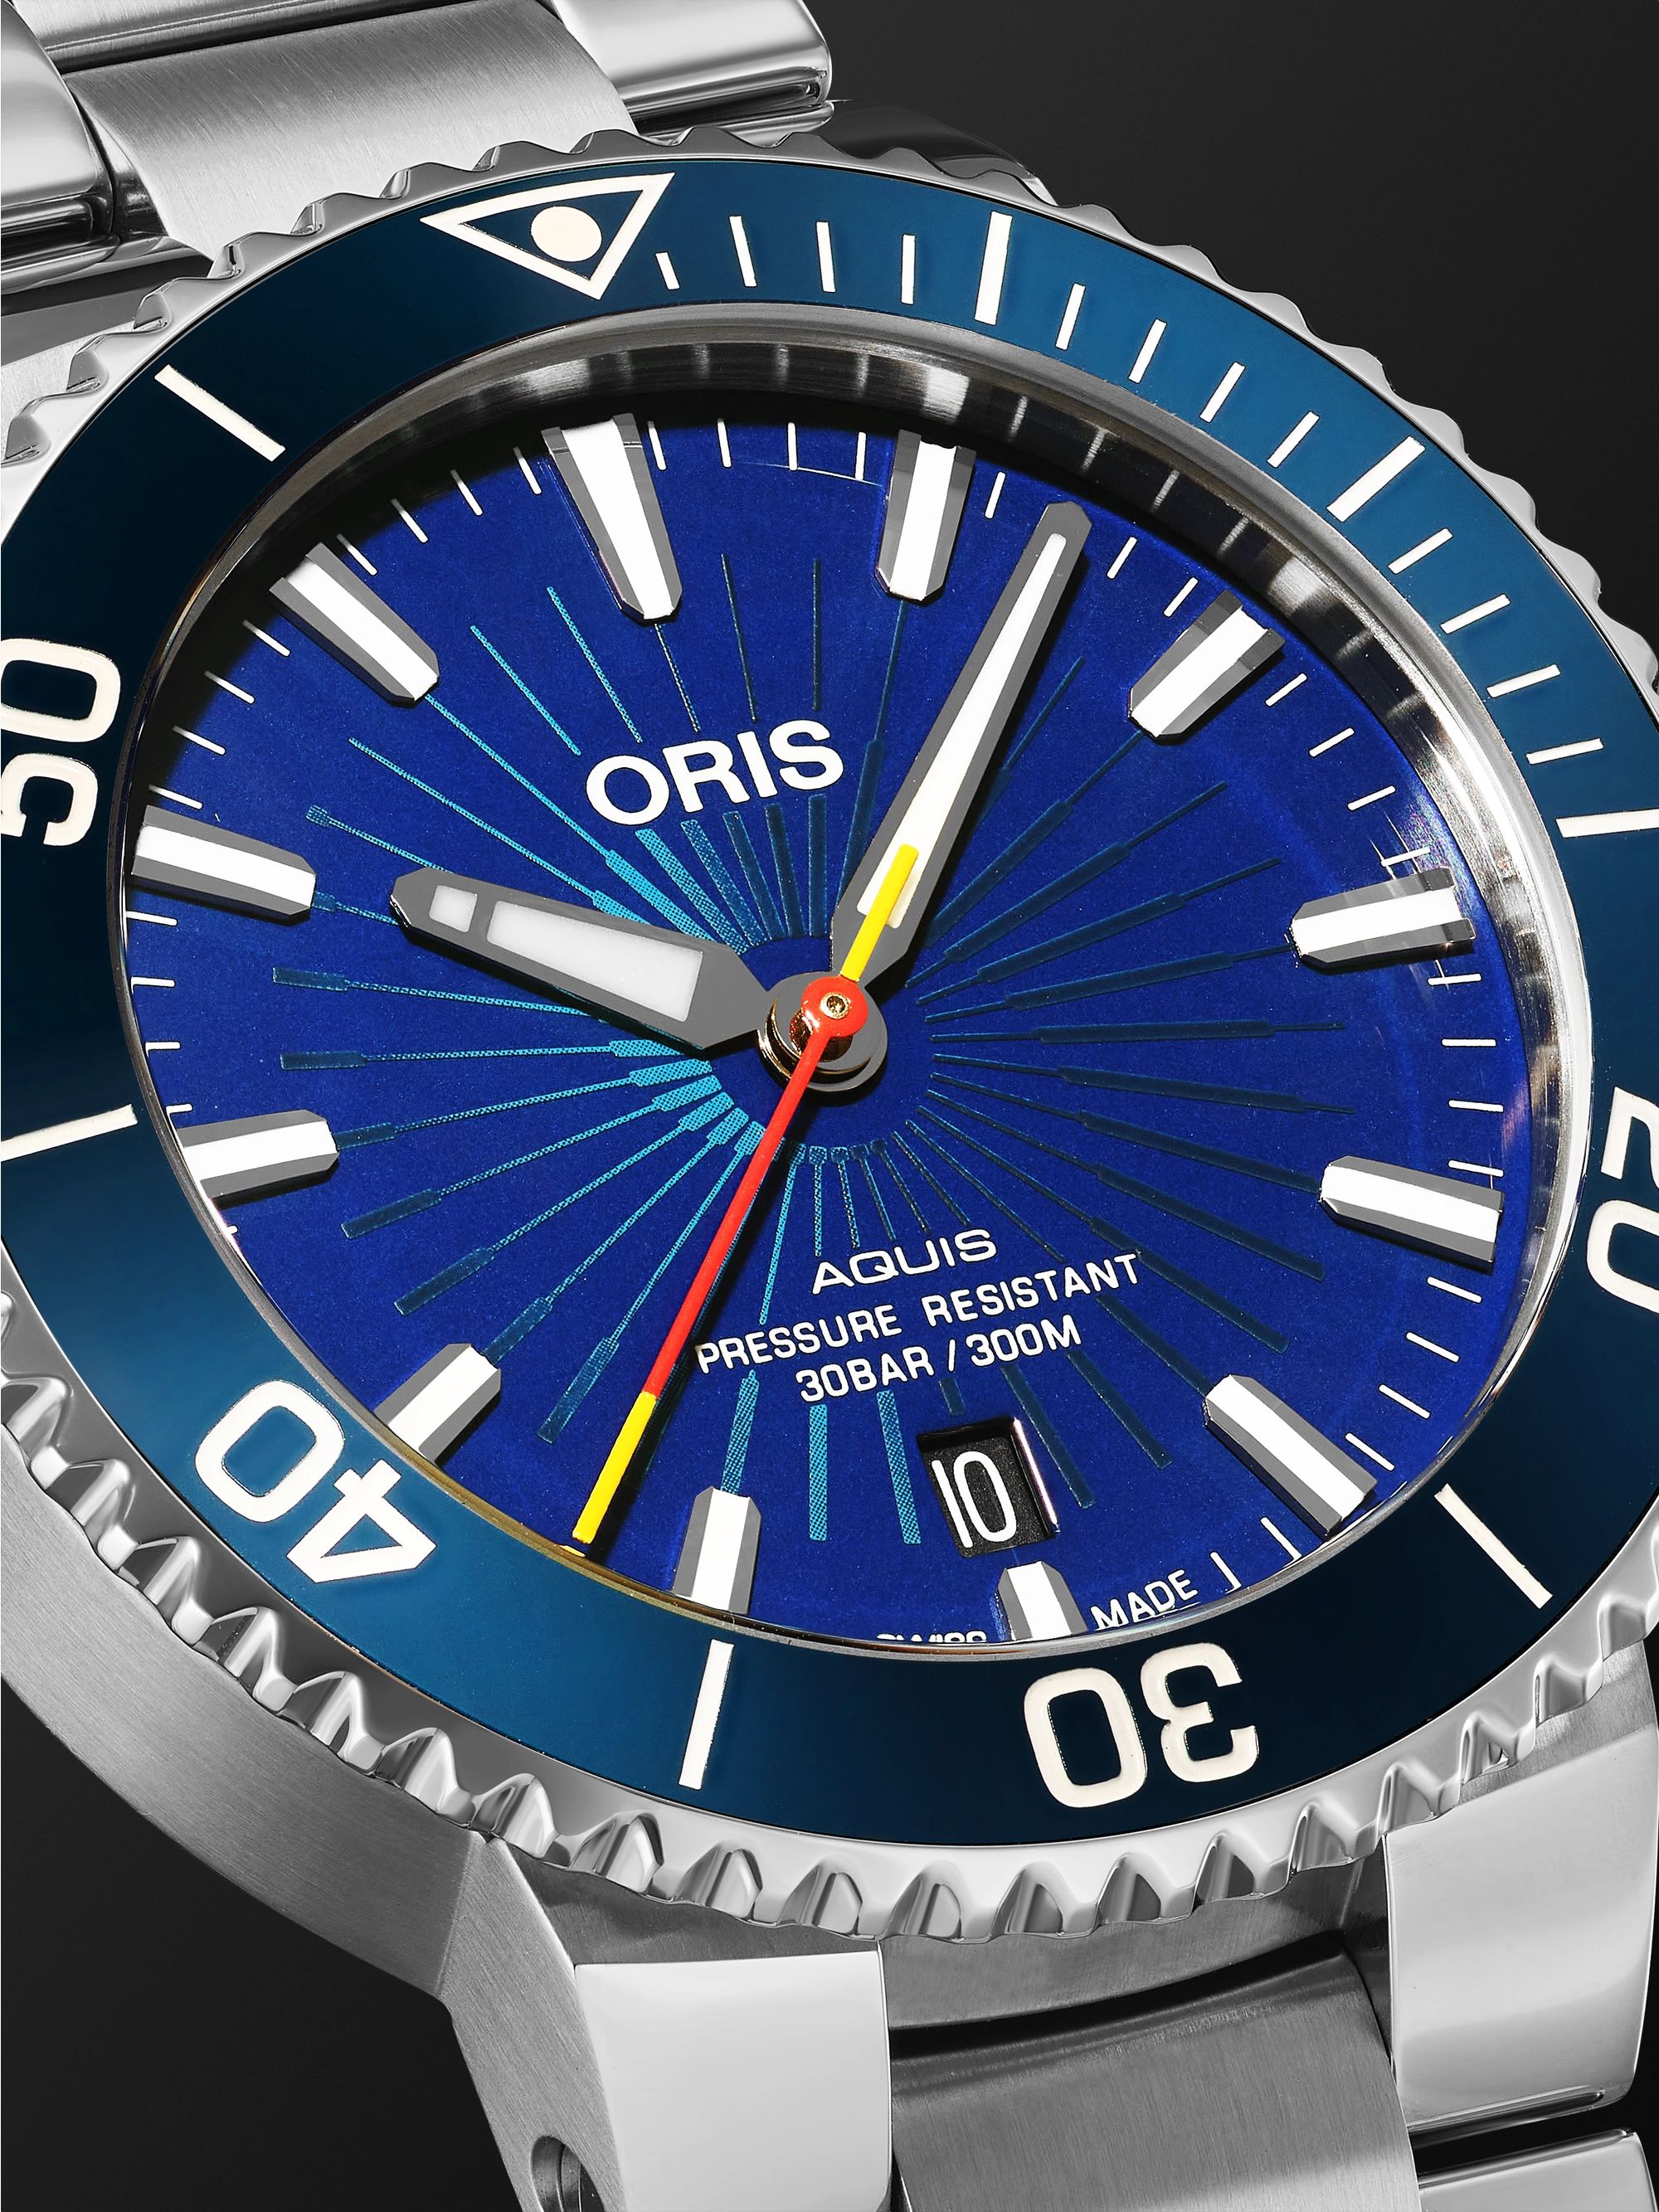 ORIS Aquis Date Sun Wukong Limited Edition Automatic 41.5mm Stainless Steel Watch, Ref. No. 01 733 7766 4185-Set